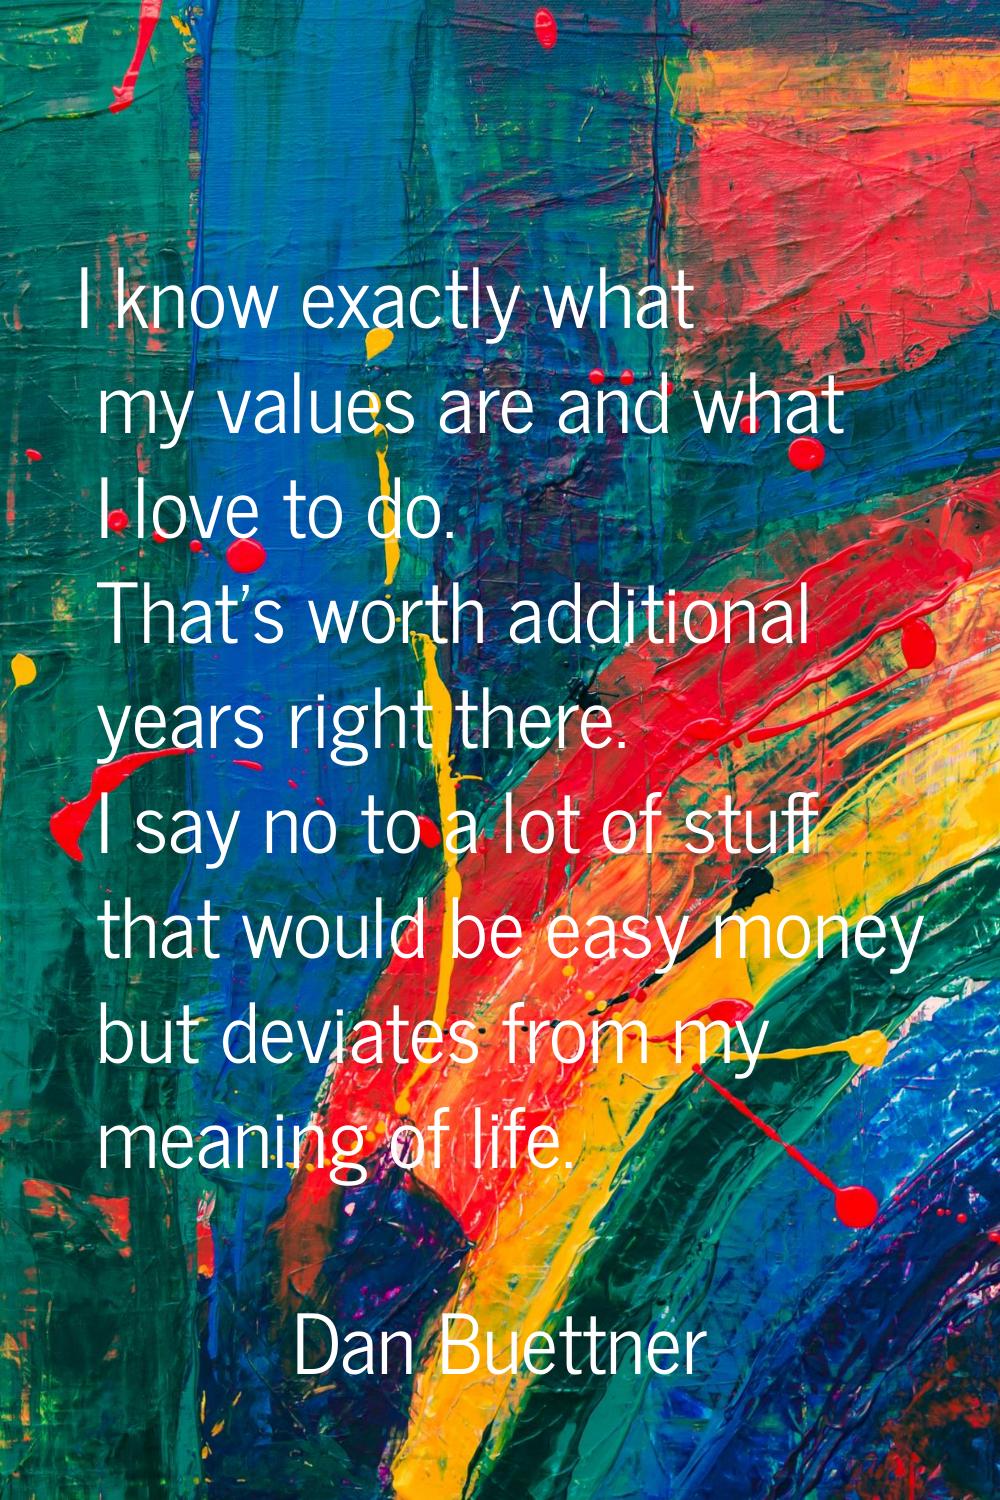 I know exactly what my values are and what I love to do. That's worth additional years right there.